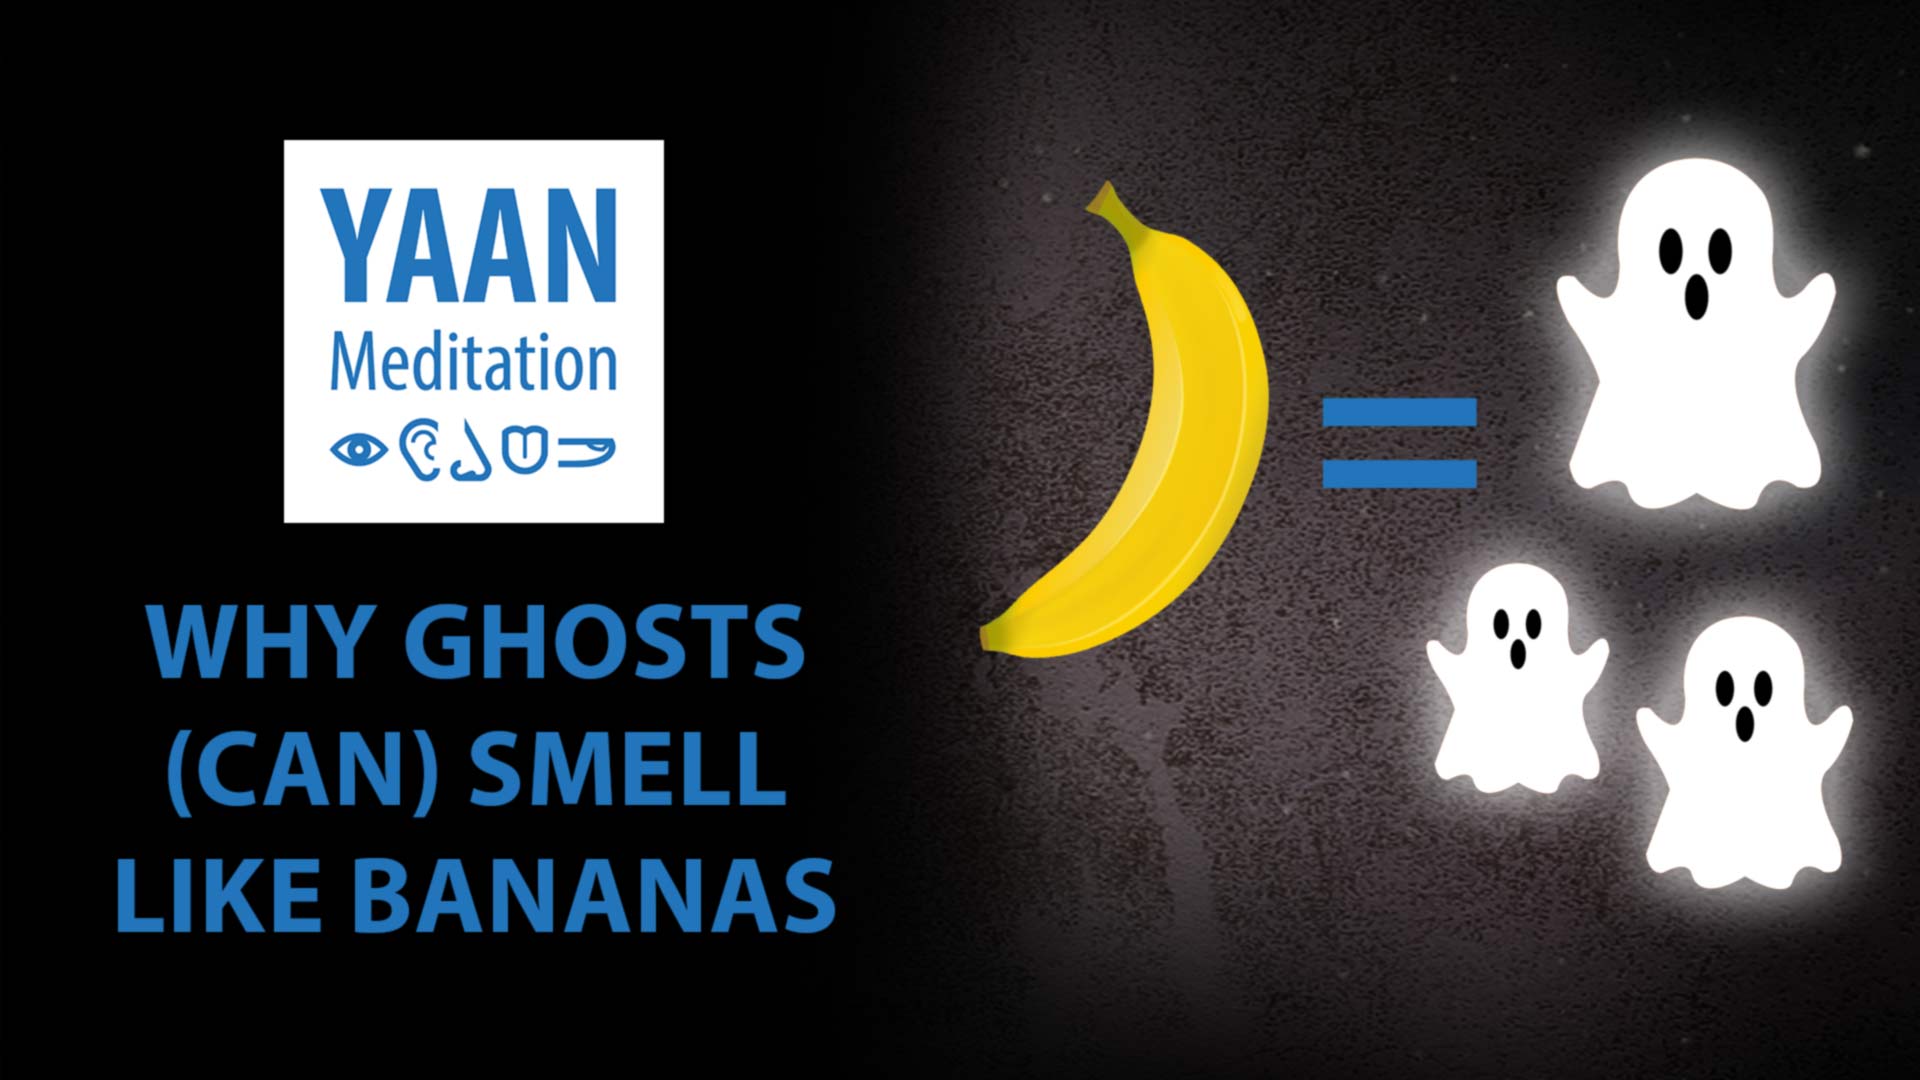 Yaan meditation why ghosts can smell like bananas FEATURED